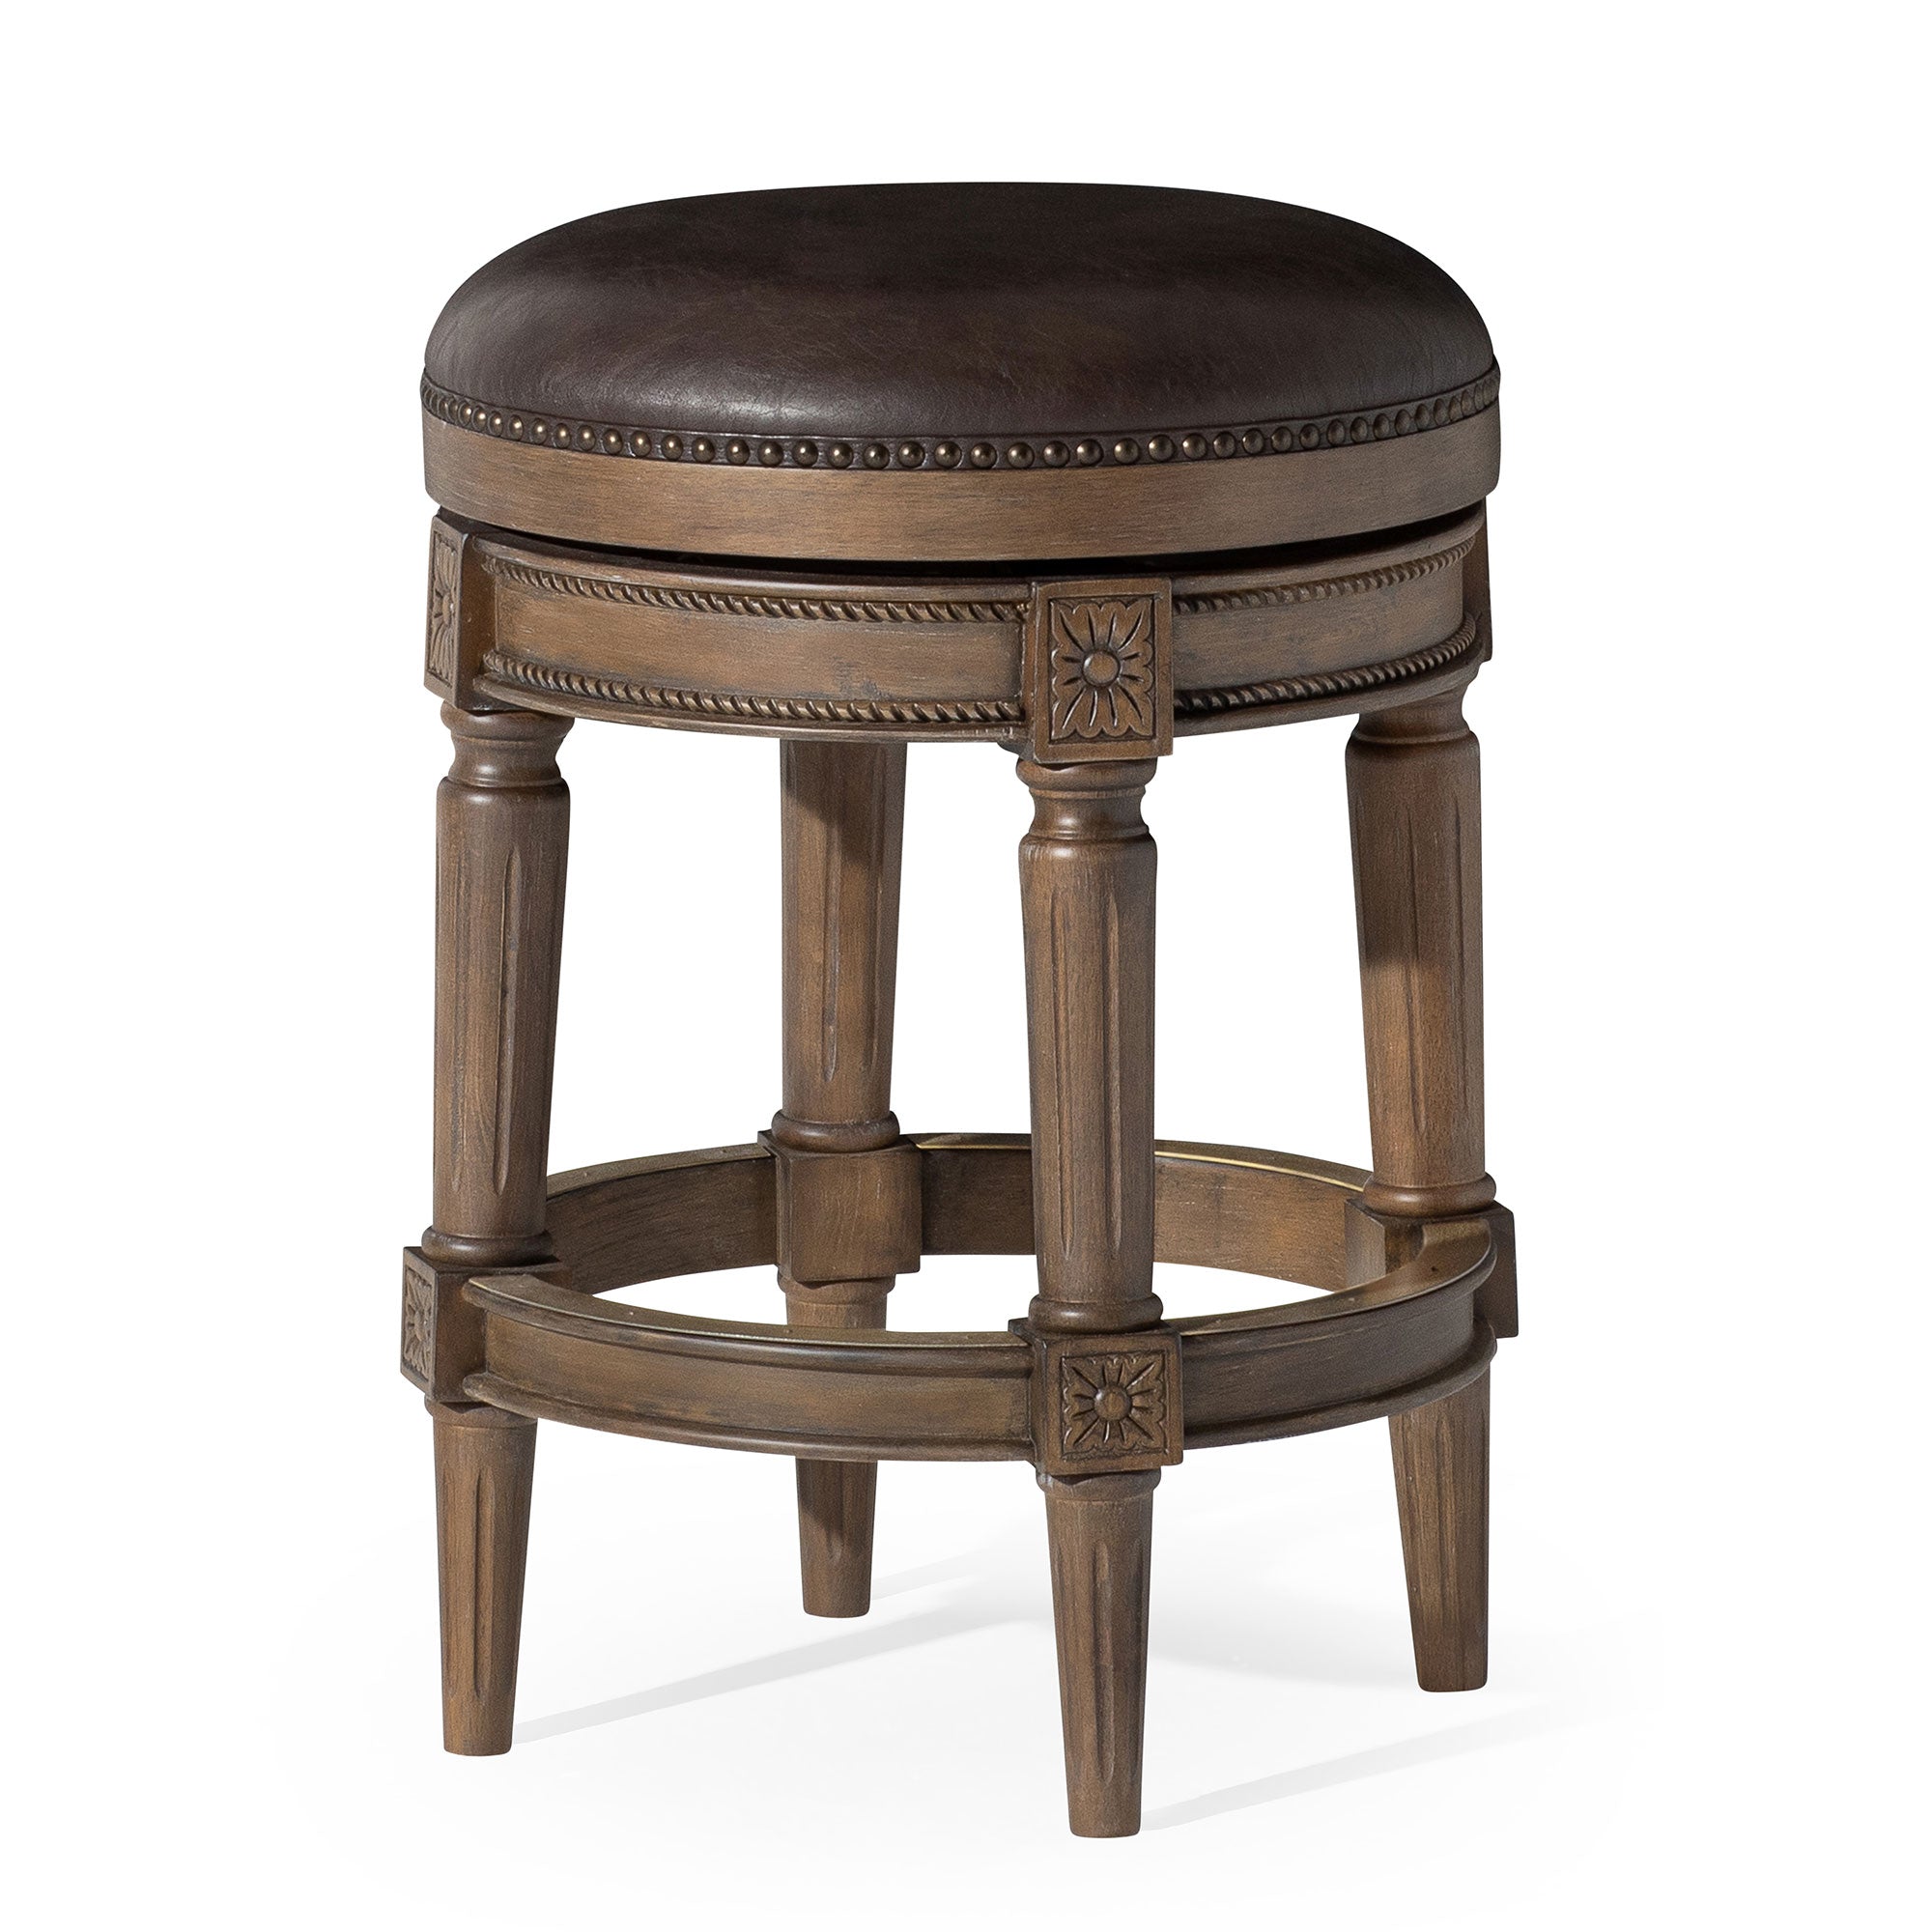 Pullman Backless Counter Stool in Walnut Finish with Marksman Saddle Vegan Leather in Stools by Maven Lane